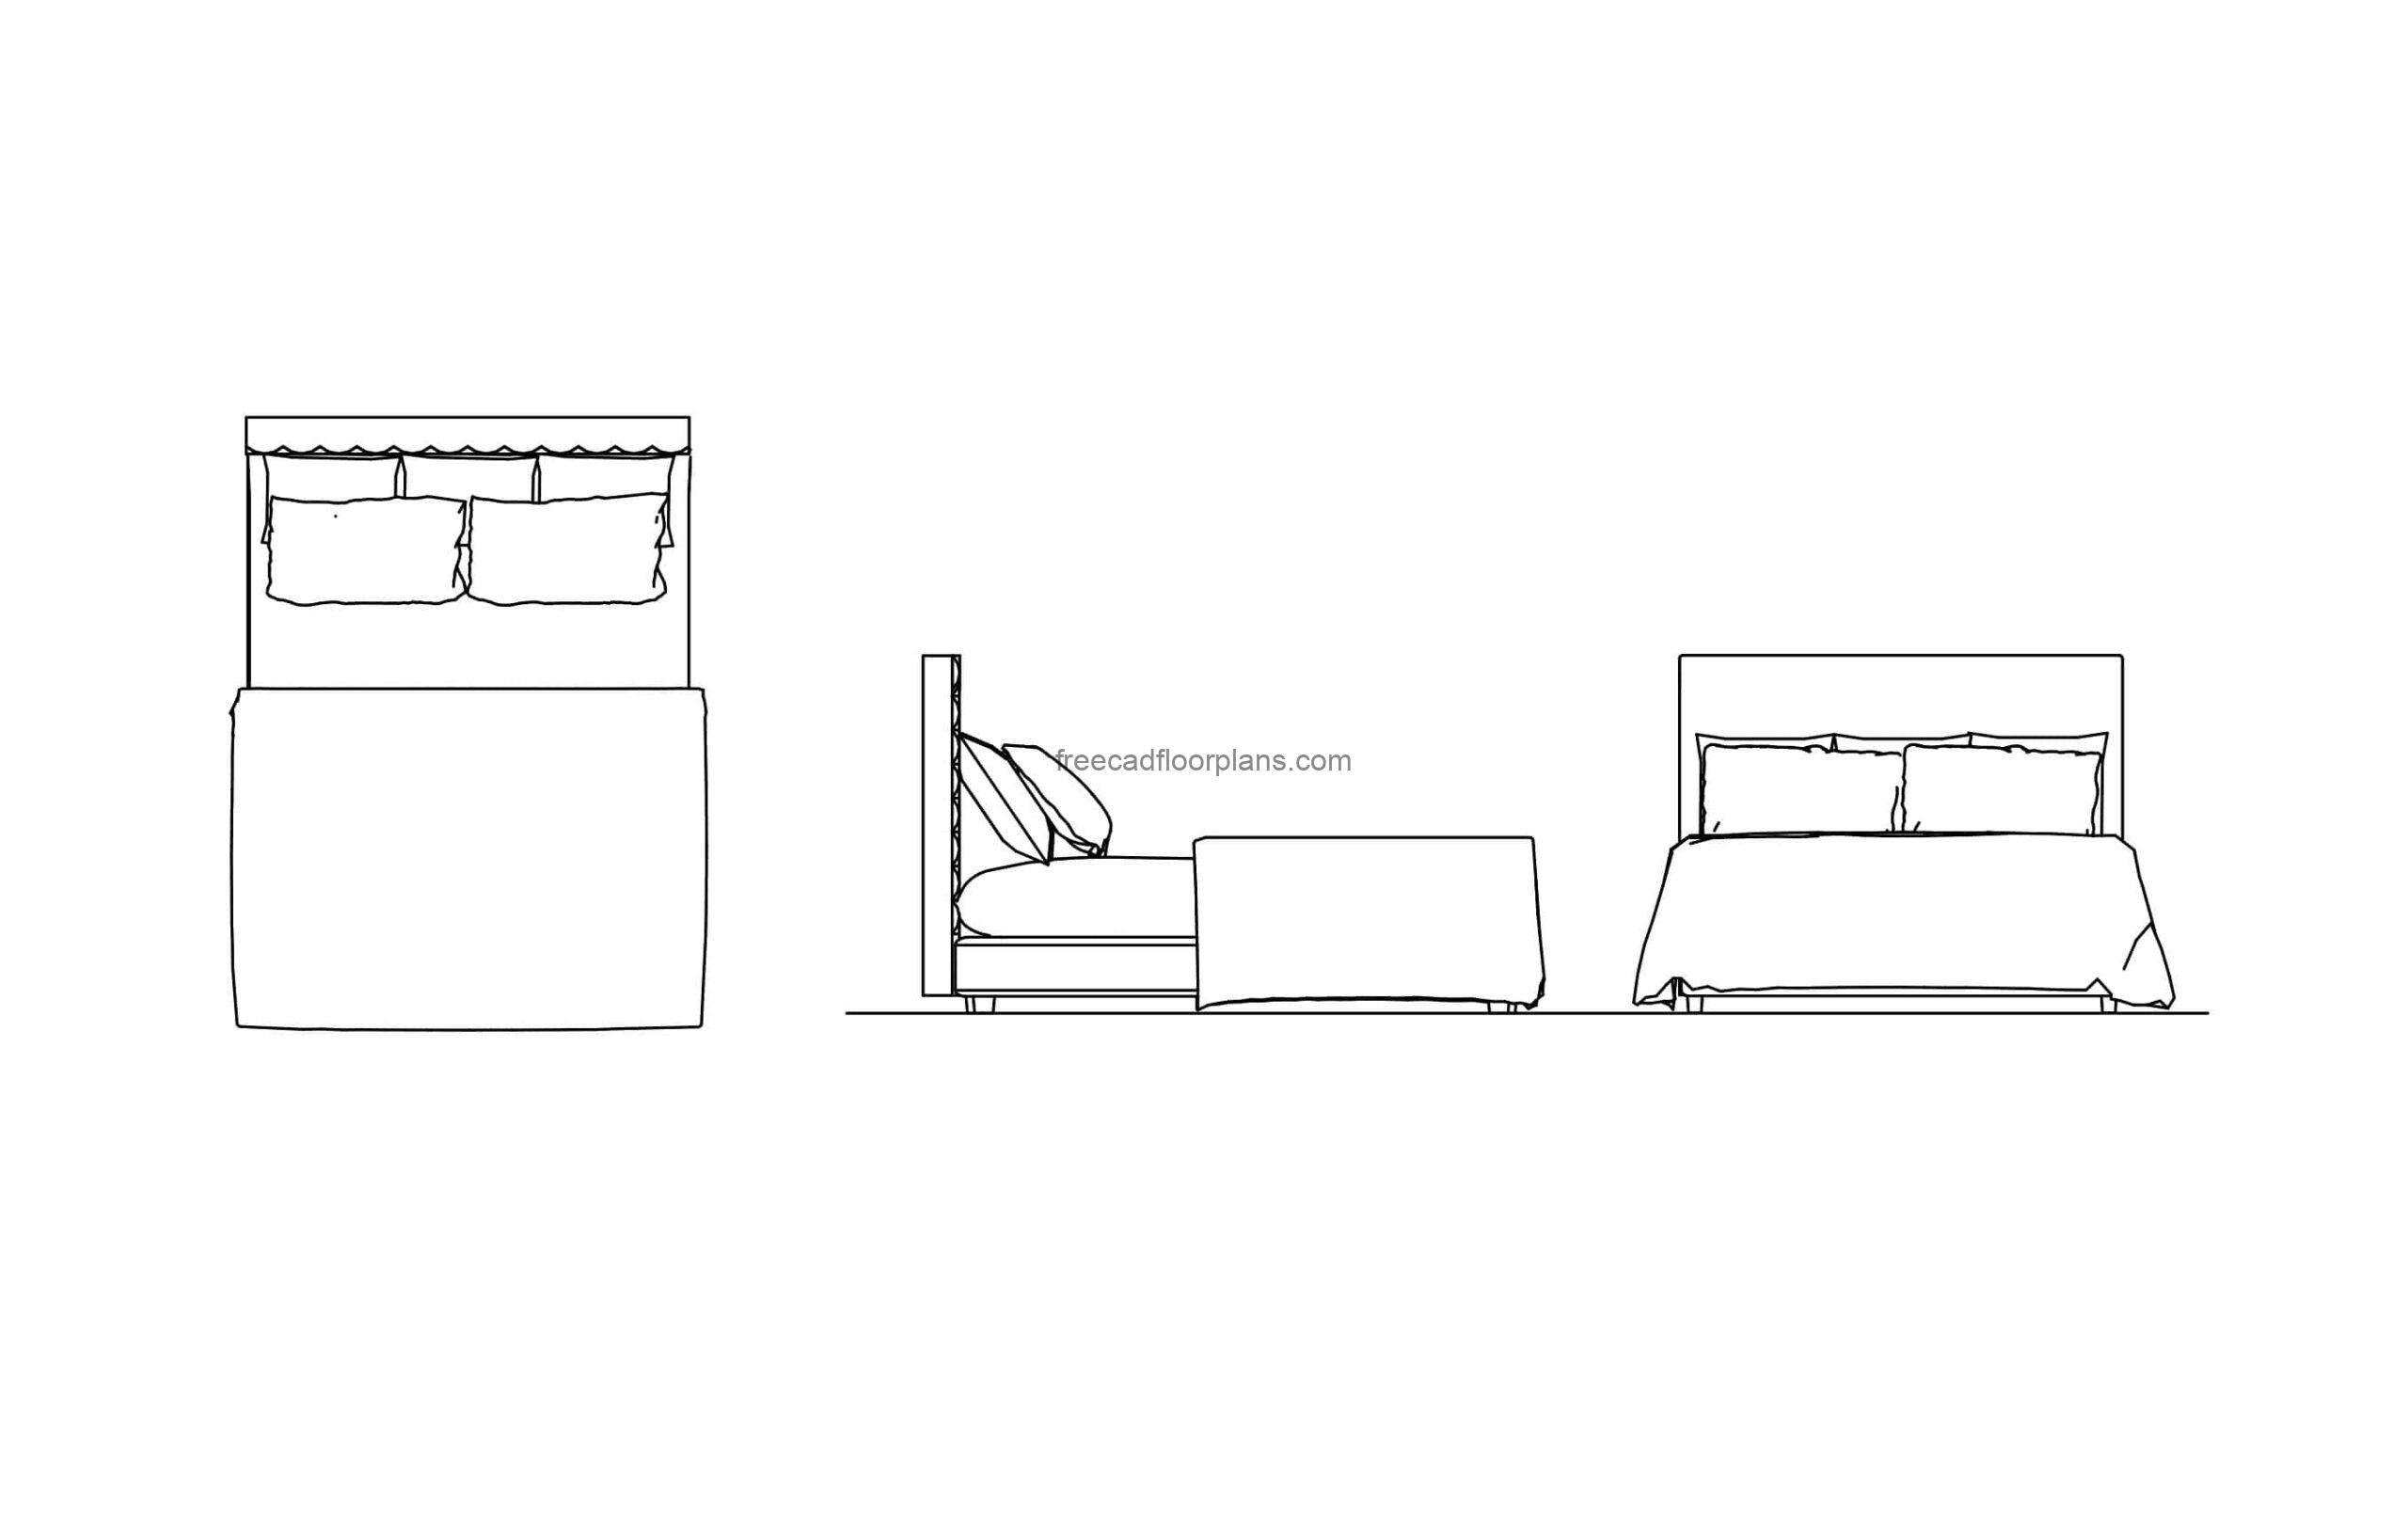 Bed In Millimeters drawings with elevations, front and top views, cad block for free download in dwg format